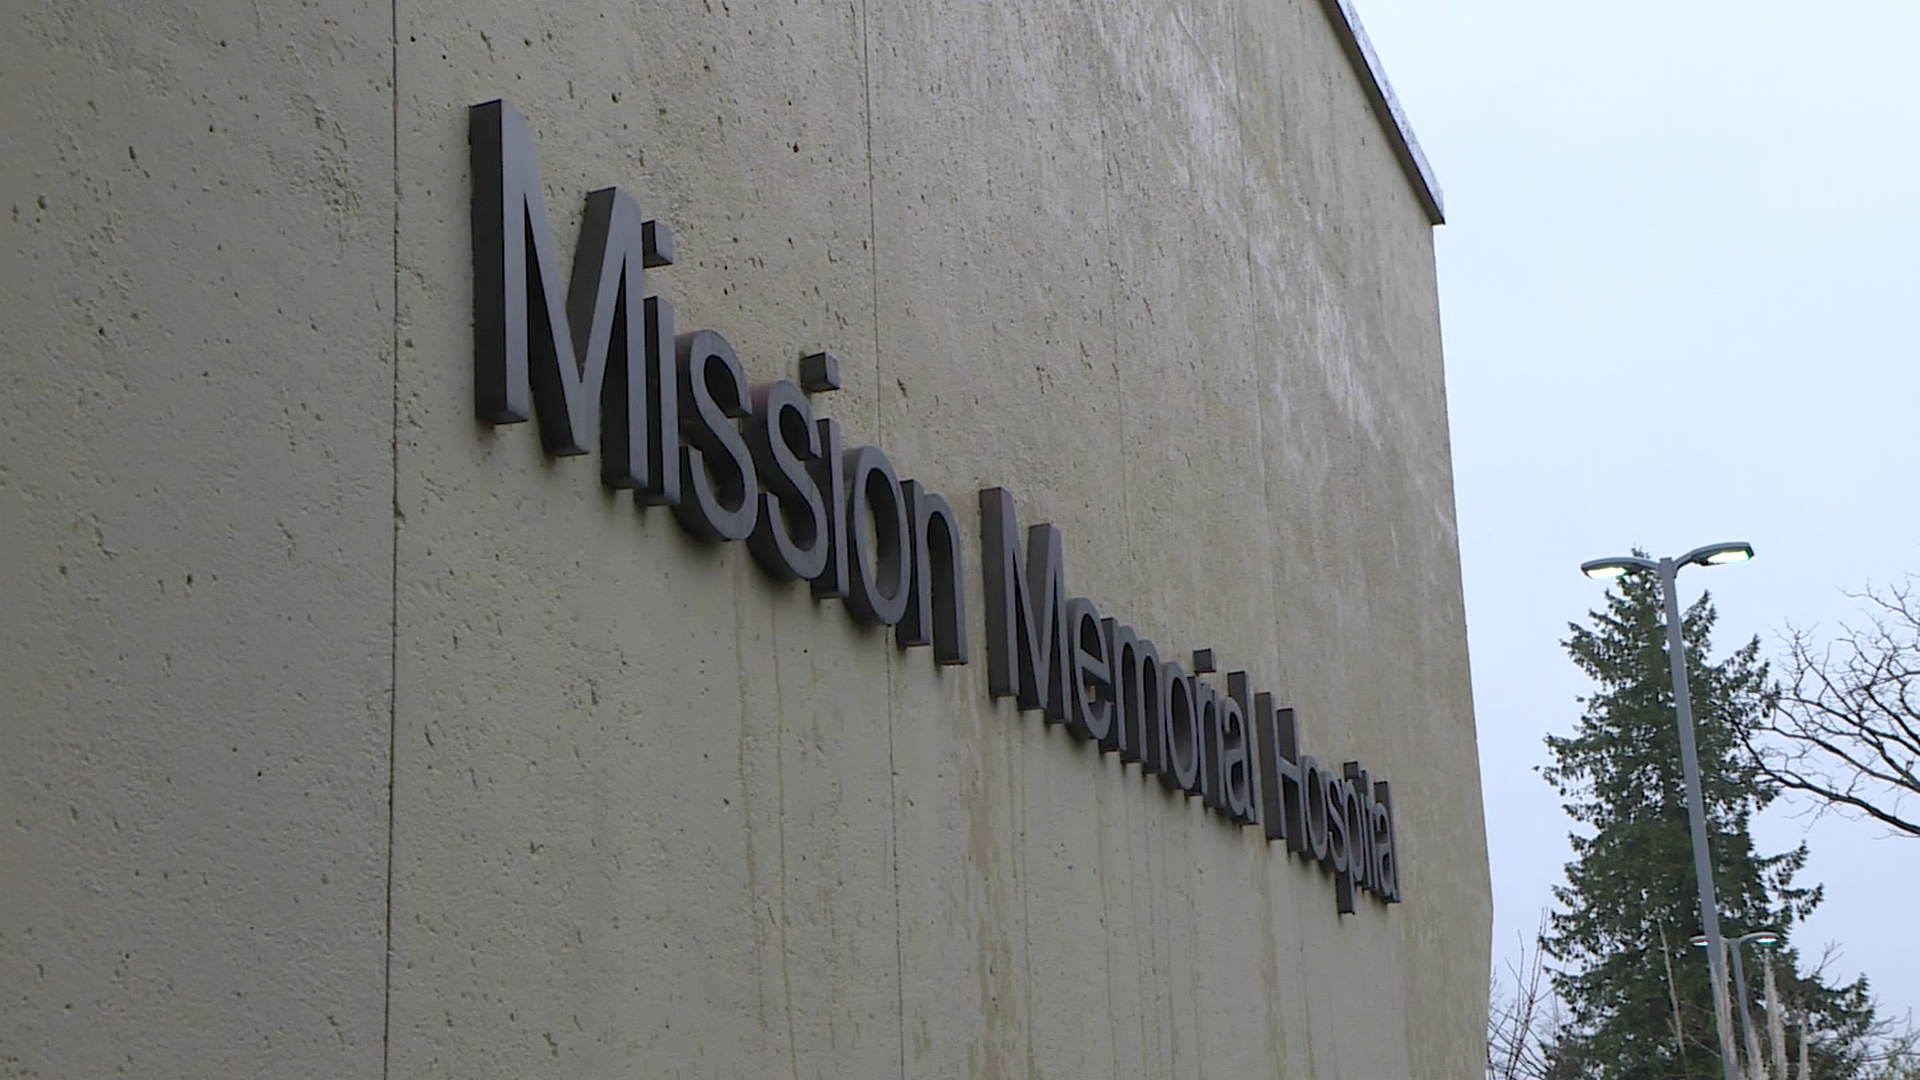 Mission hospital closes ER due to burst pipes